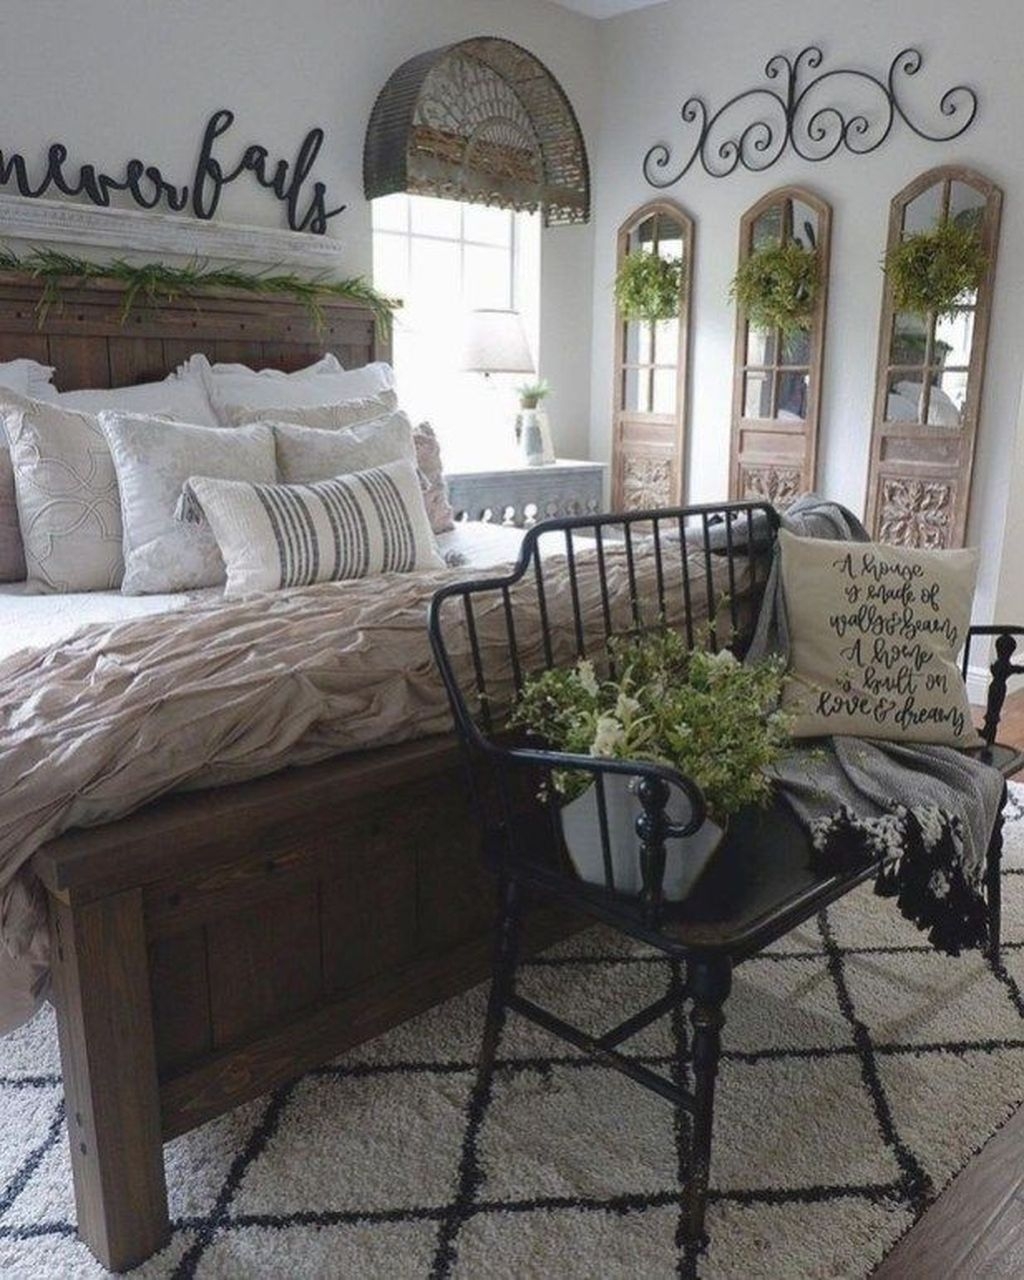 Gorgeous Farmhouse Bedroom Remodel Ideas On A Budget 03